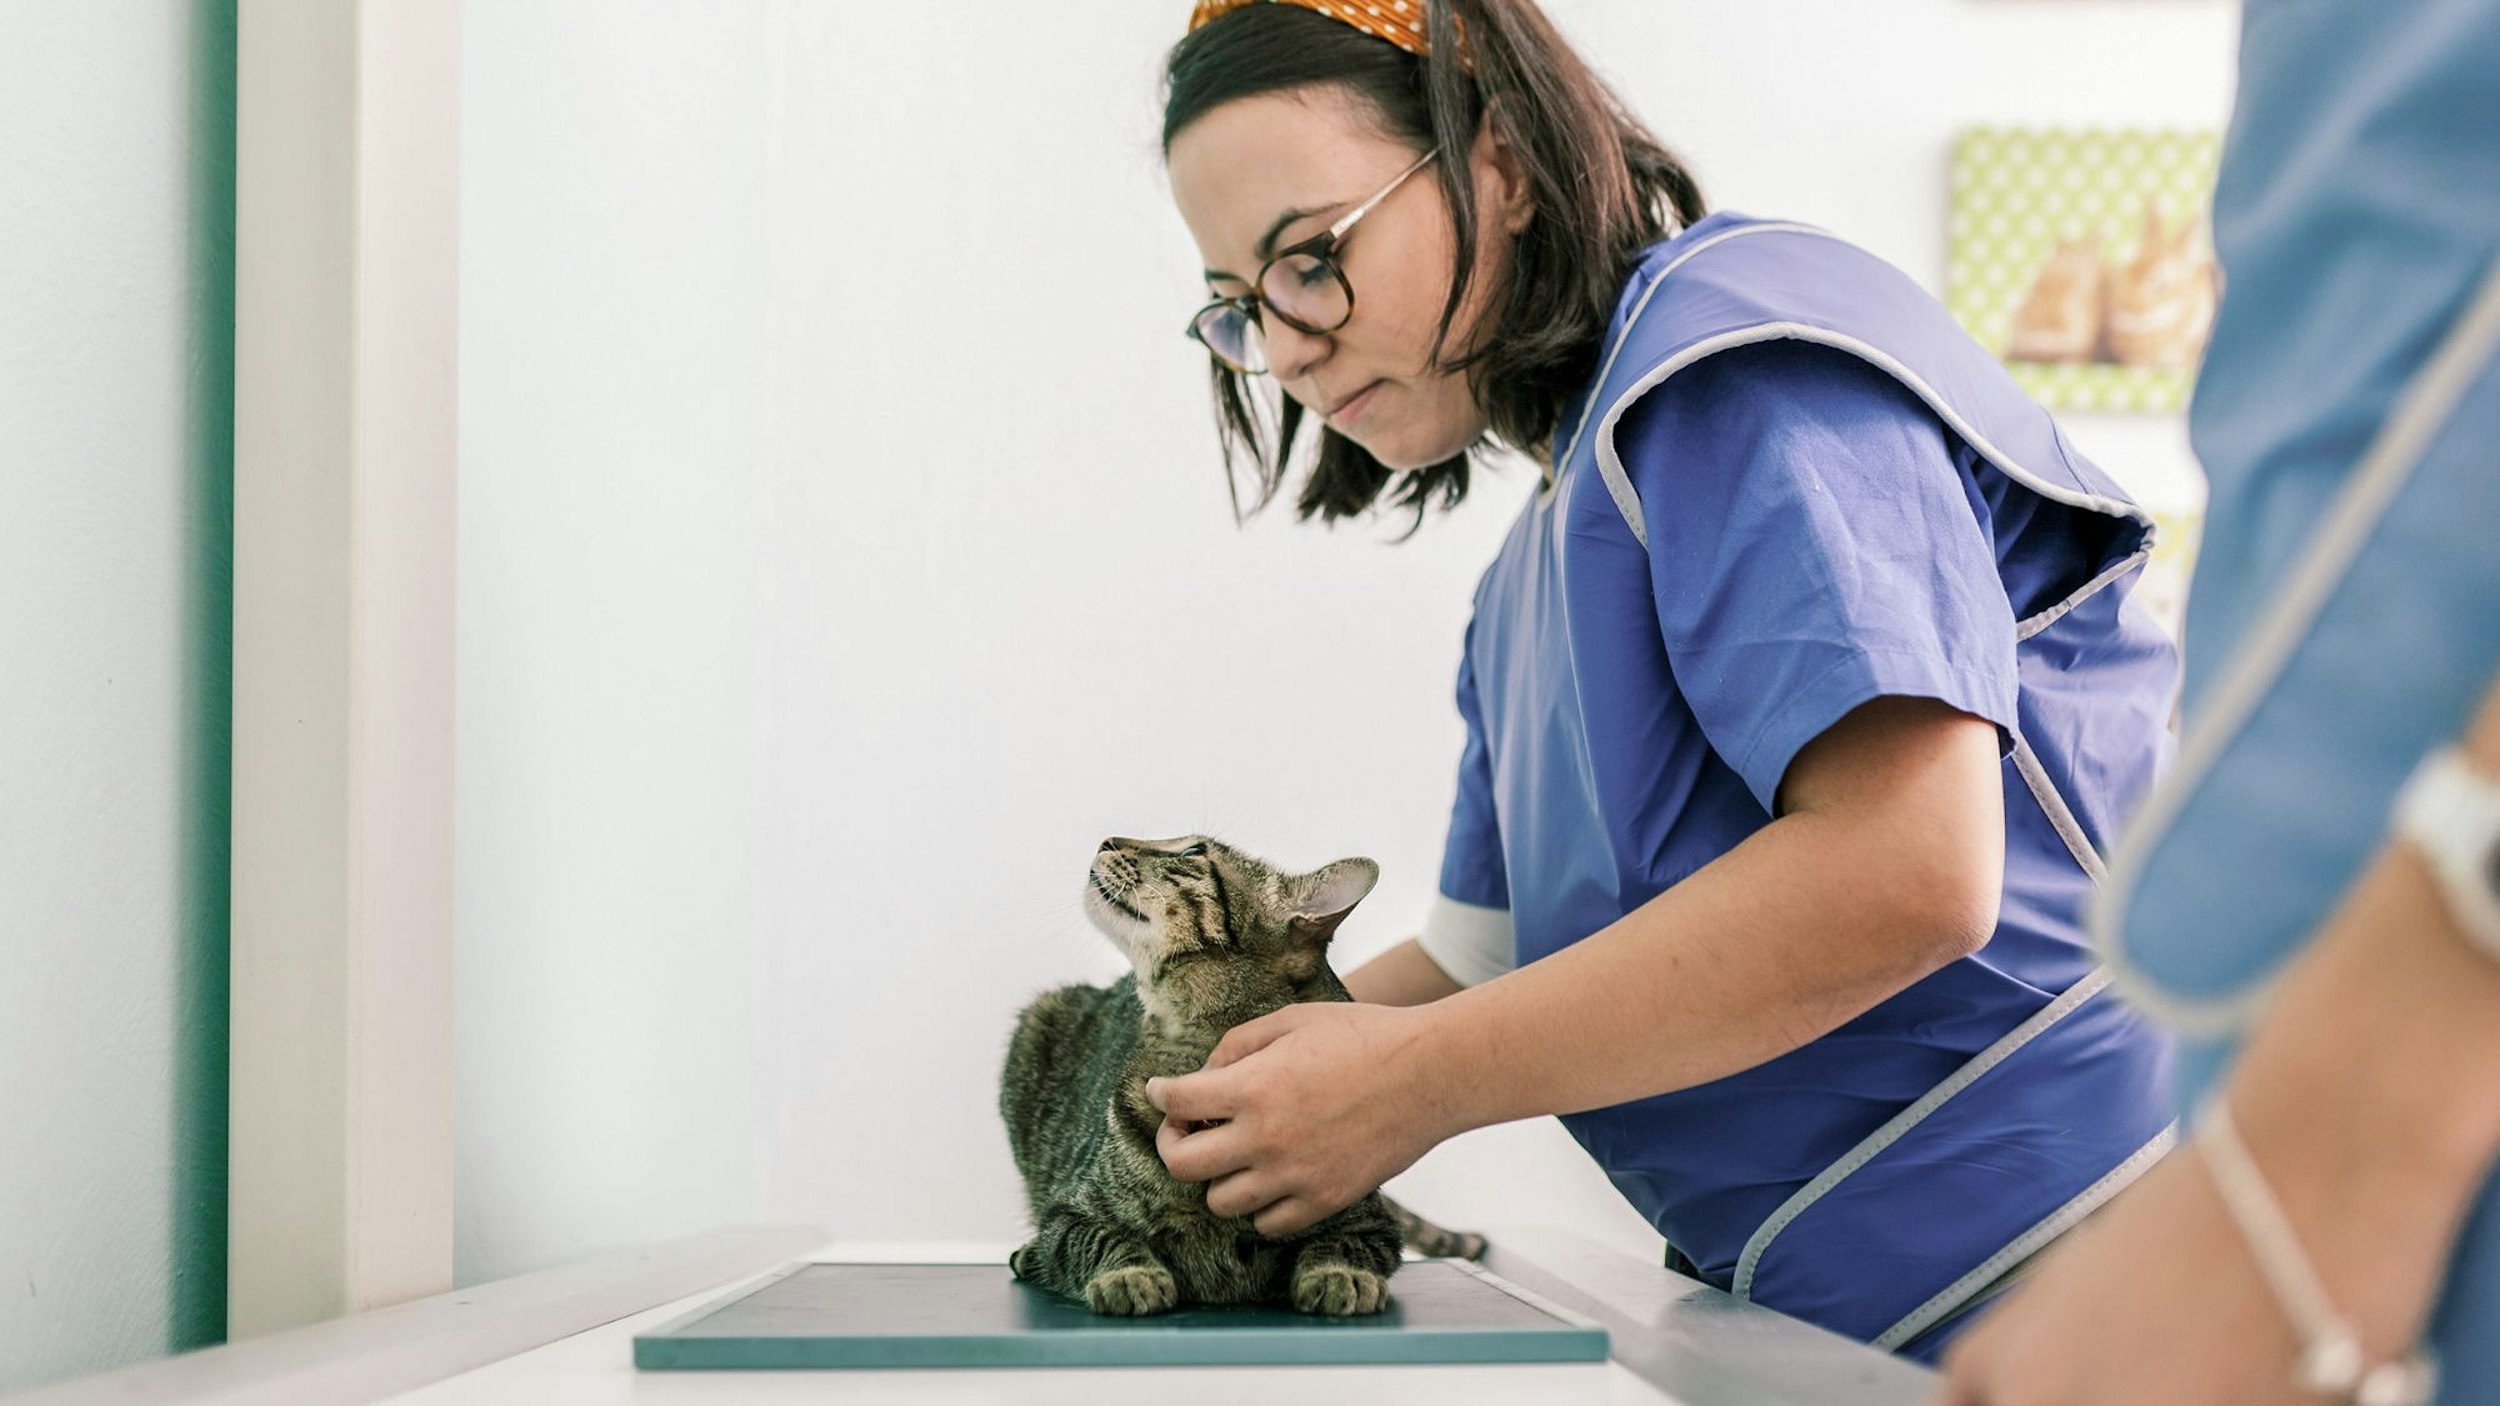 Vet looking at a tabby cat on a table